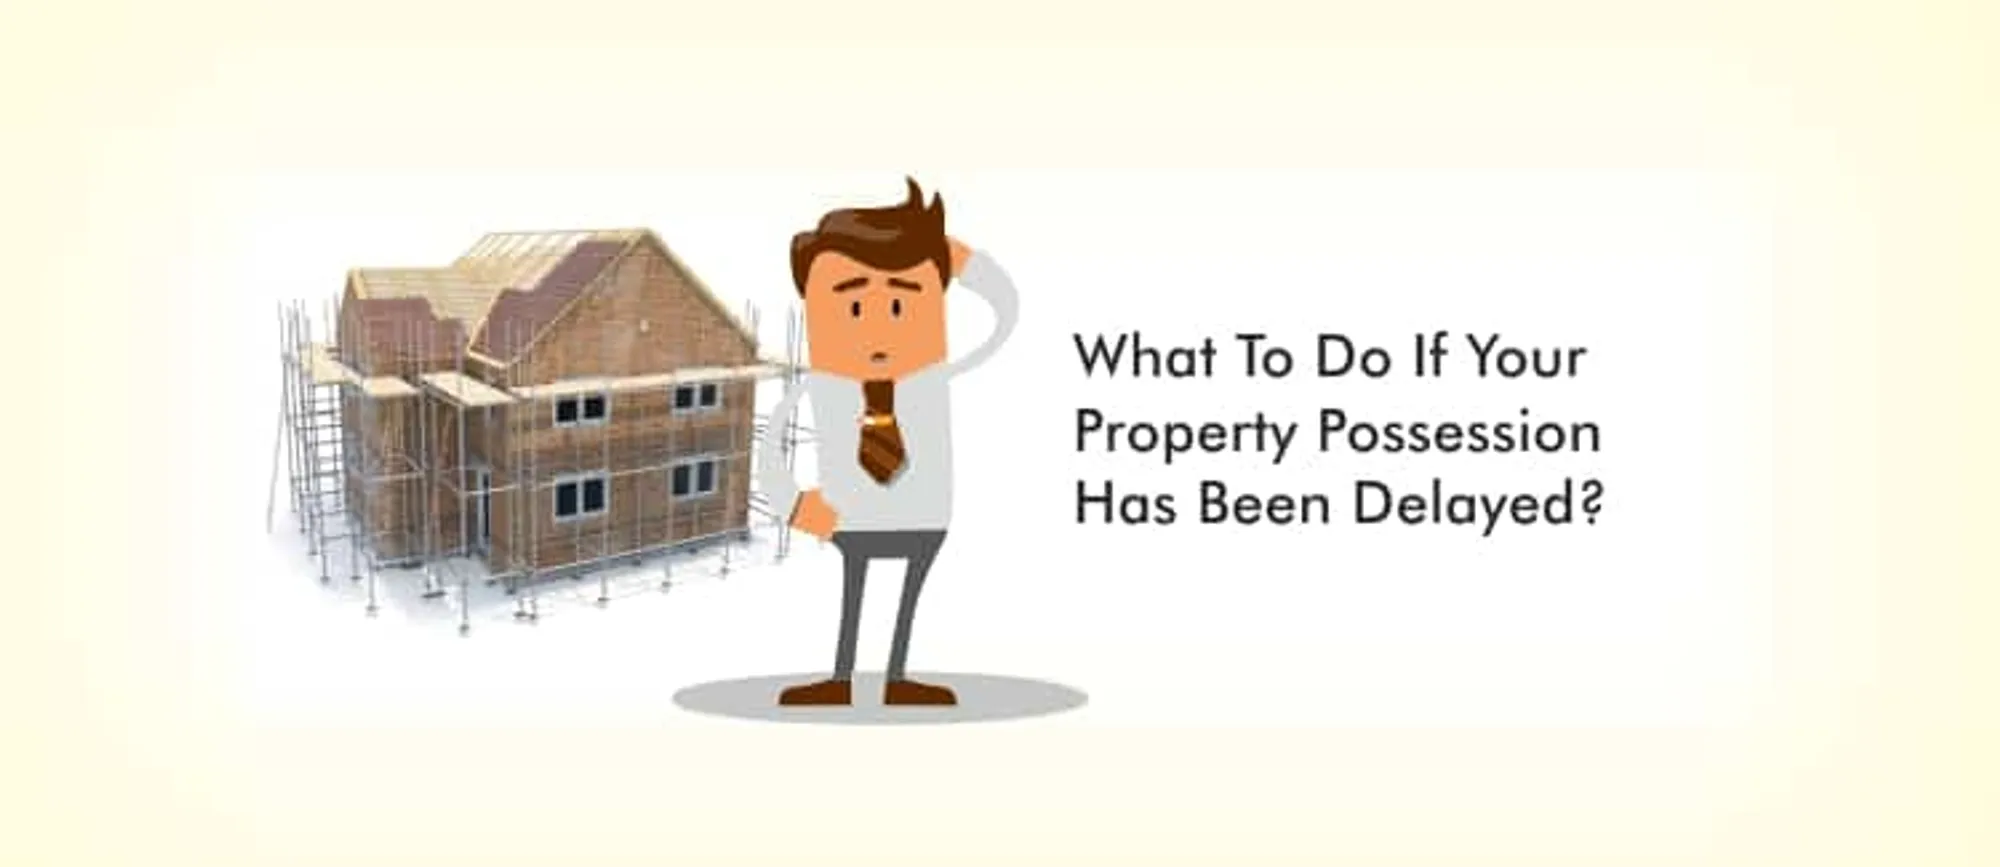 What To Do If Your Property Possession Has Been Delayed